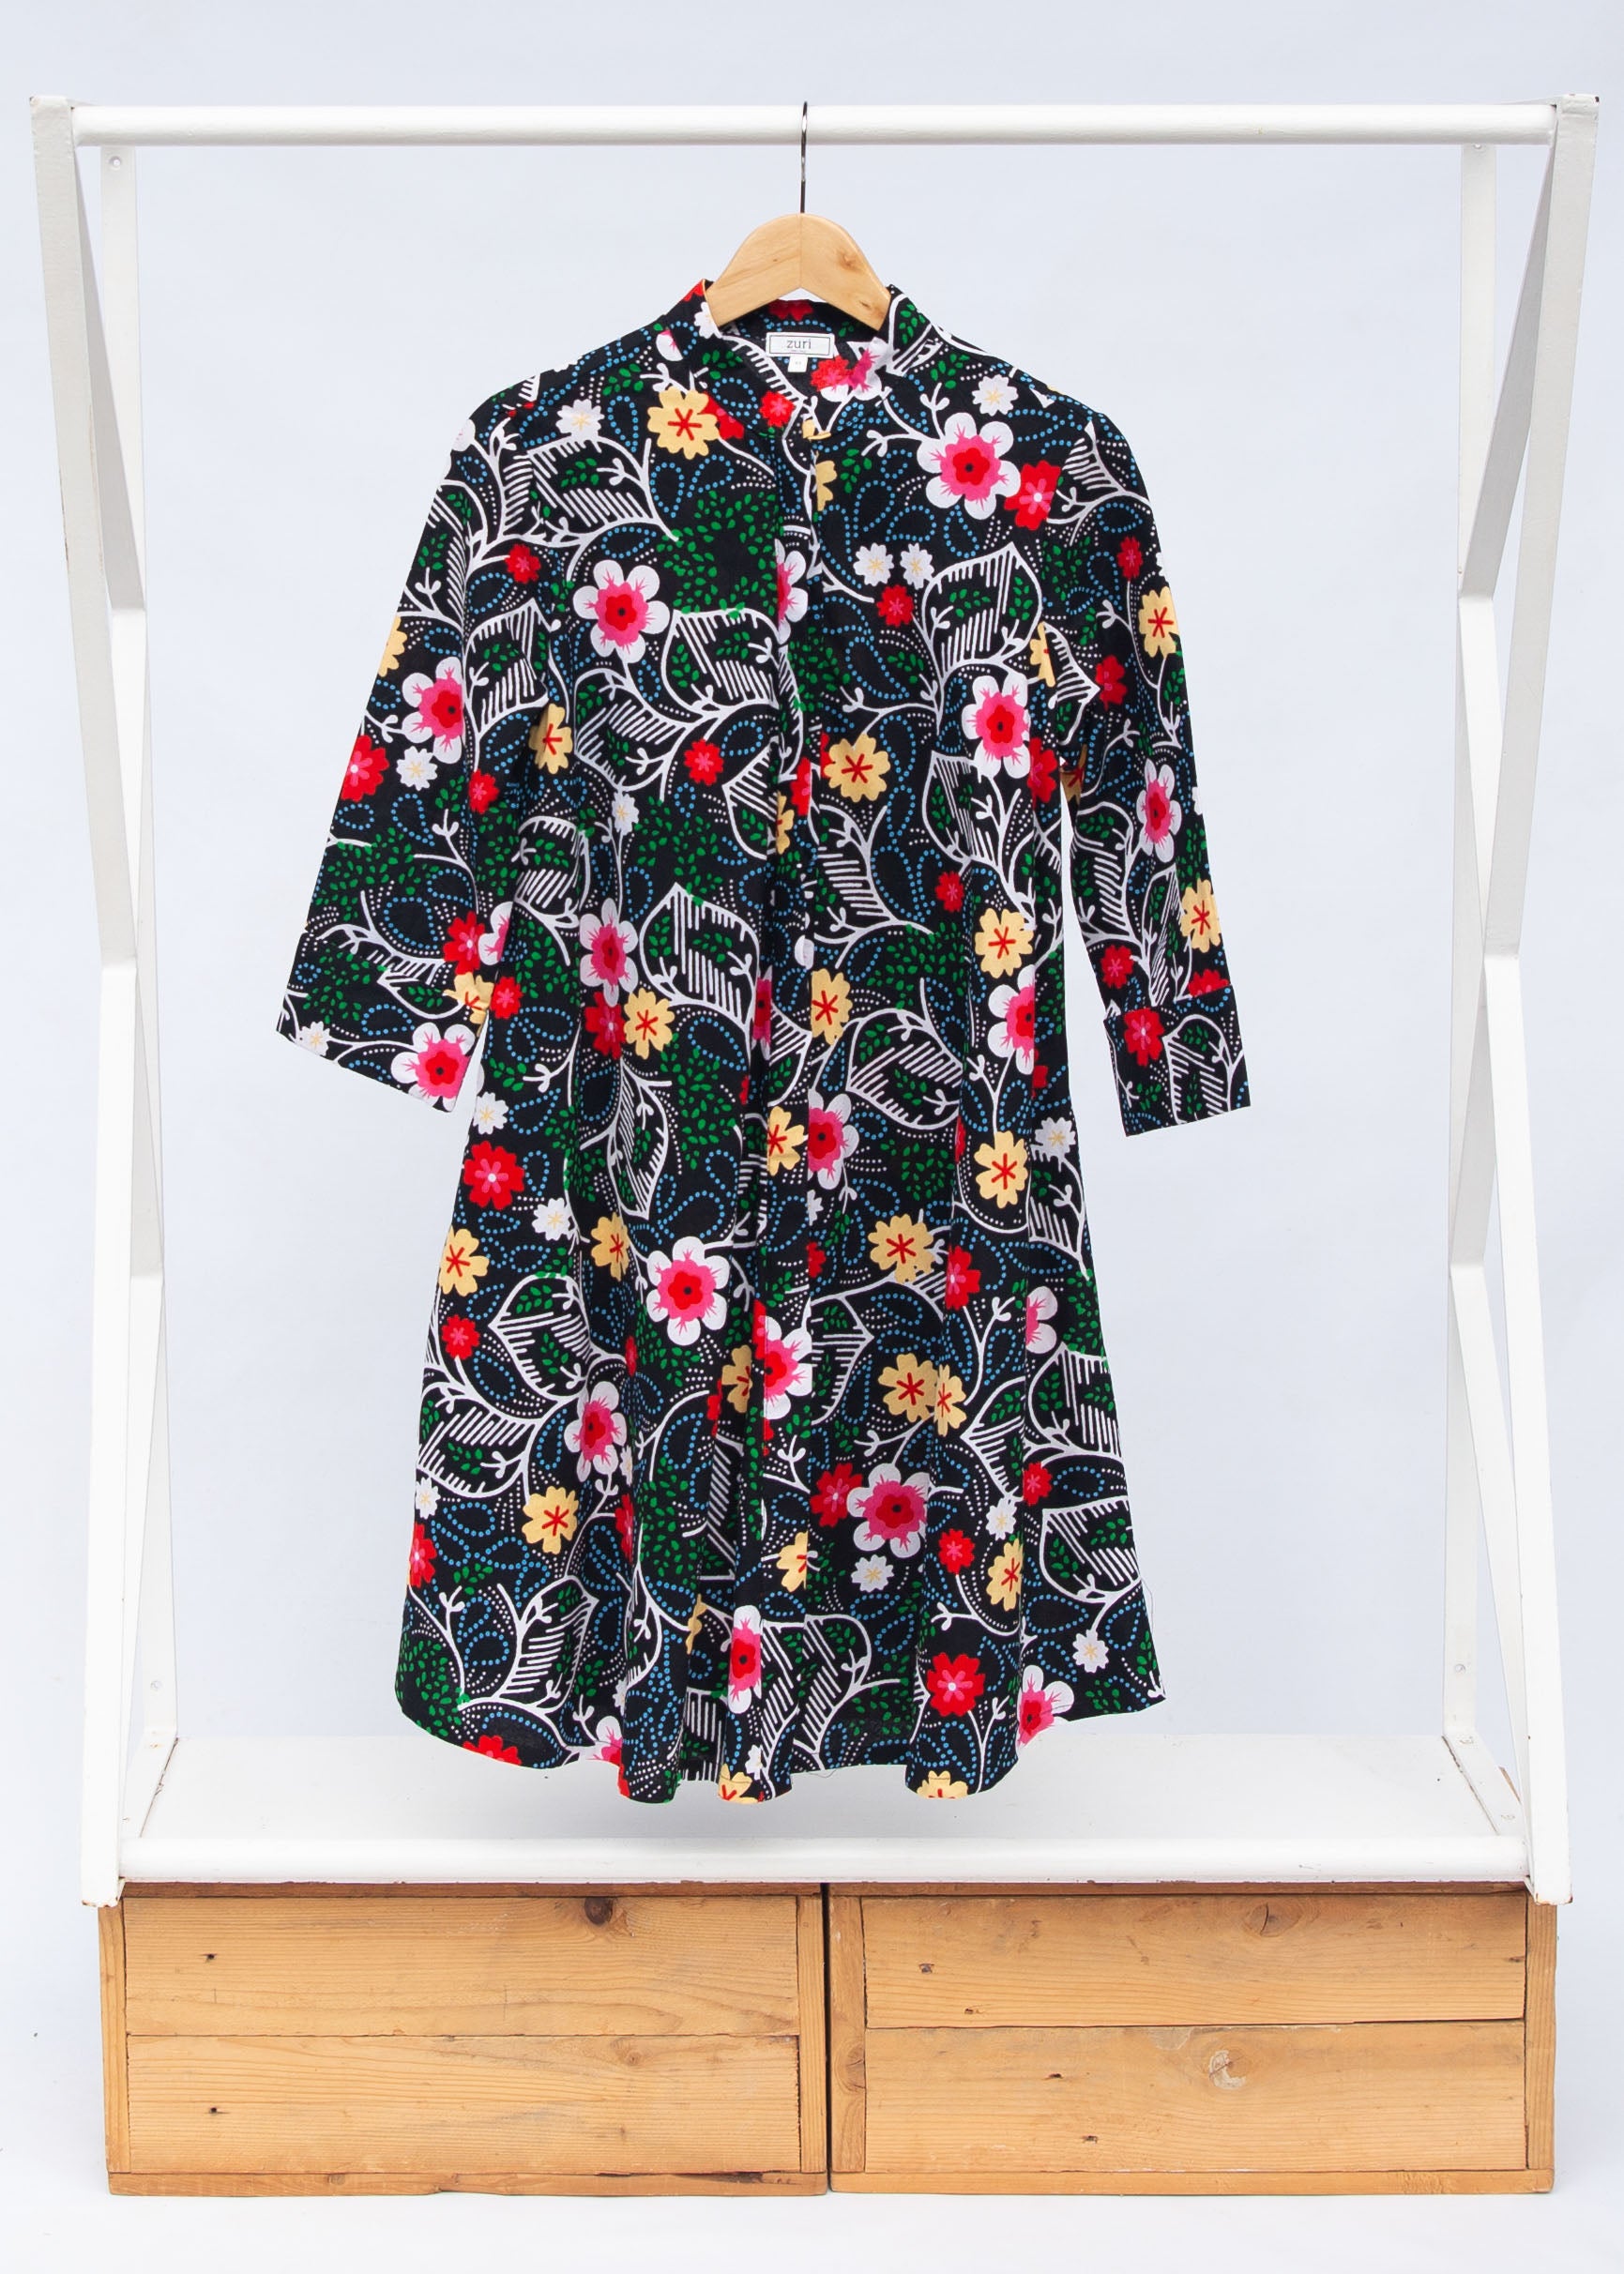 Display of black dress with white, green, red and yellow floral print.